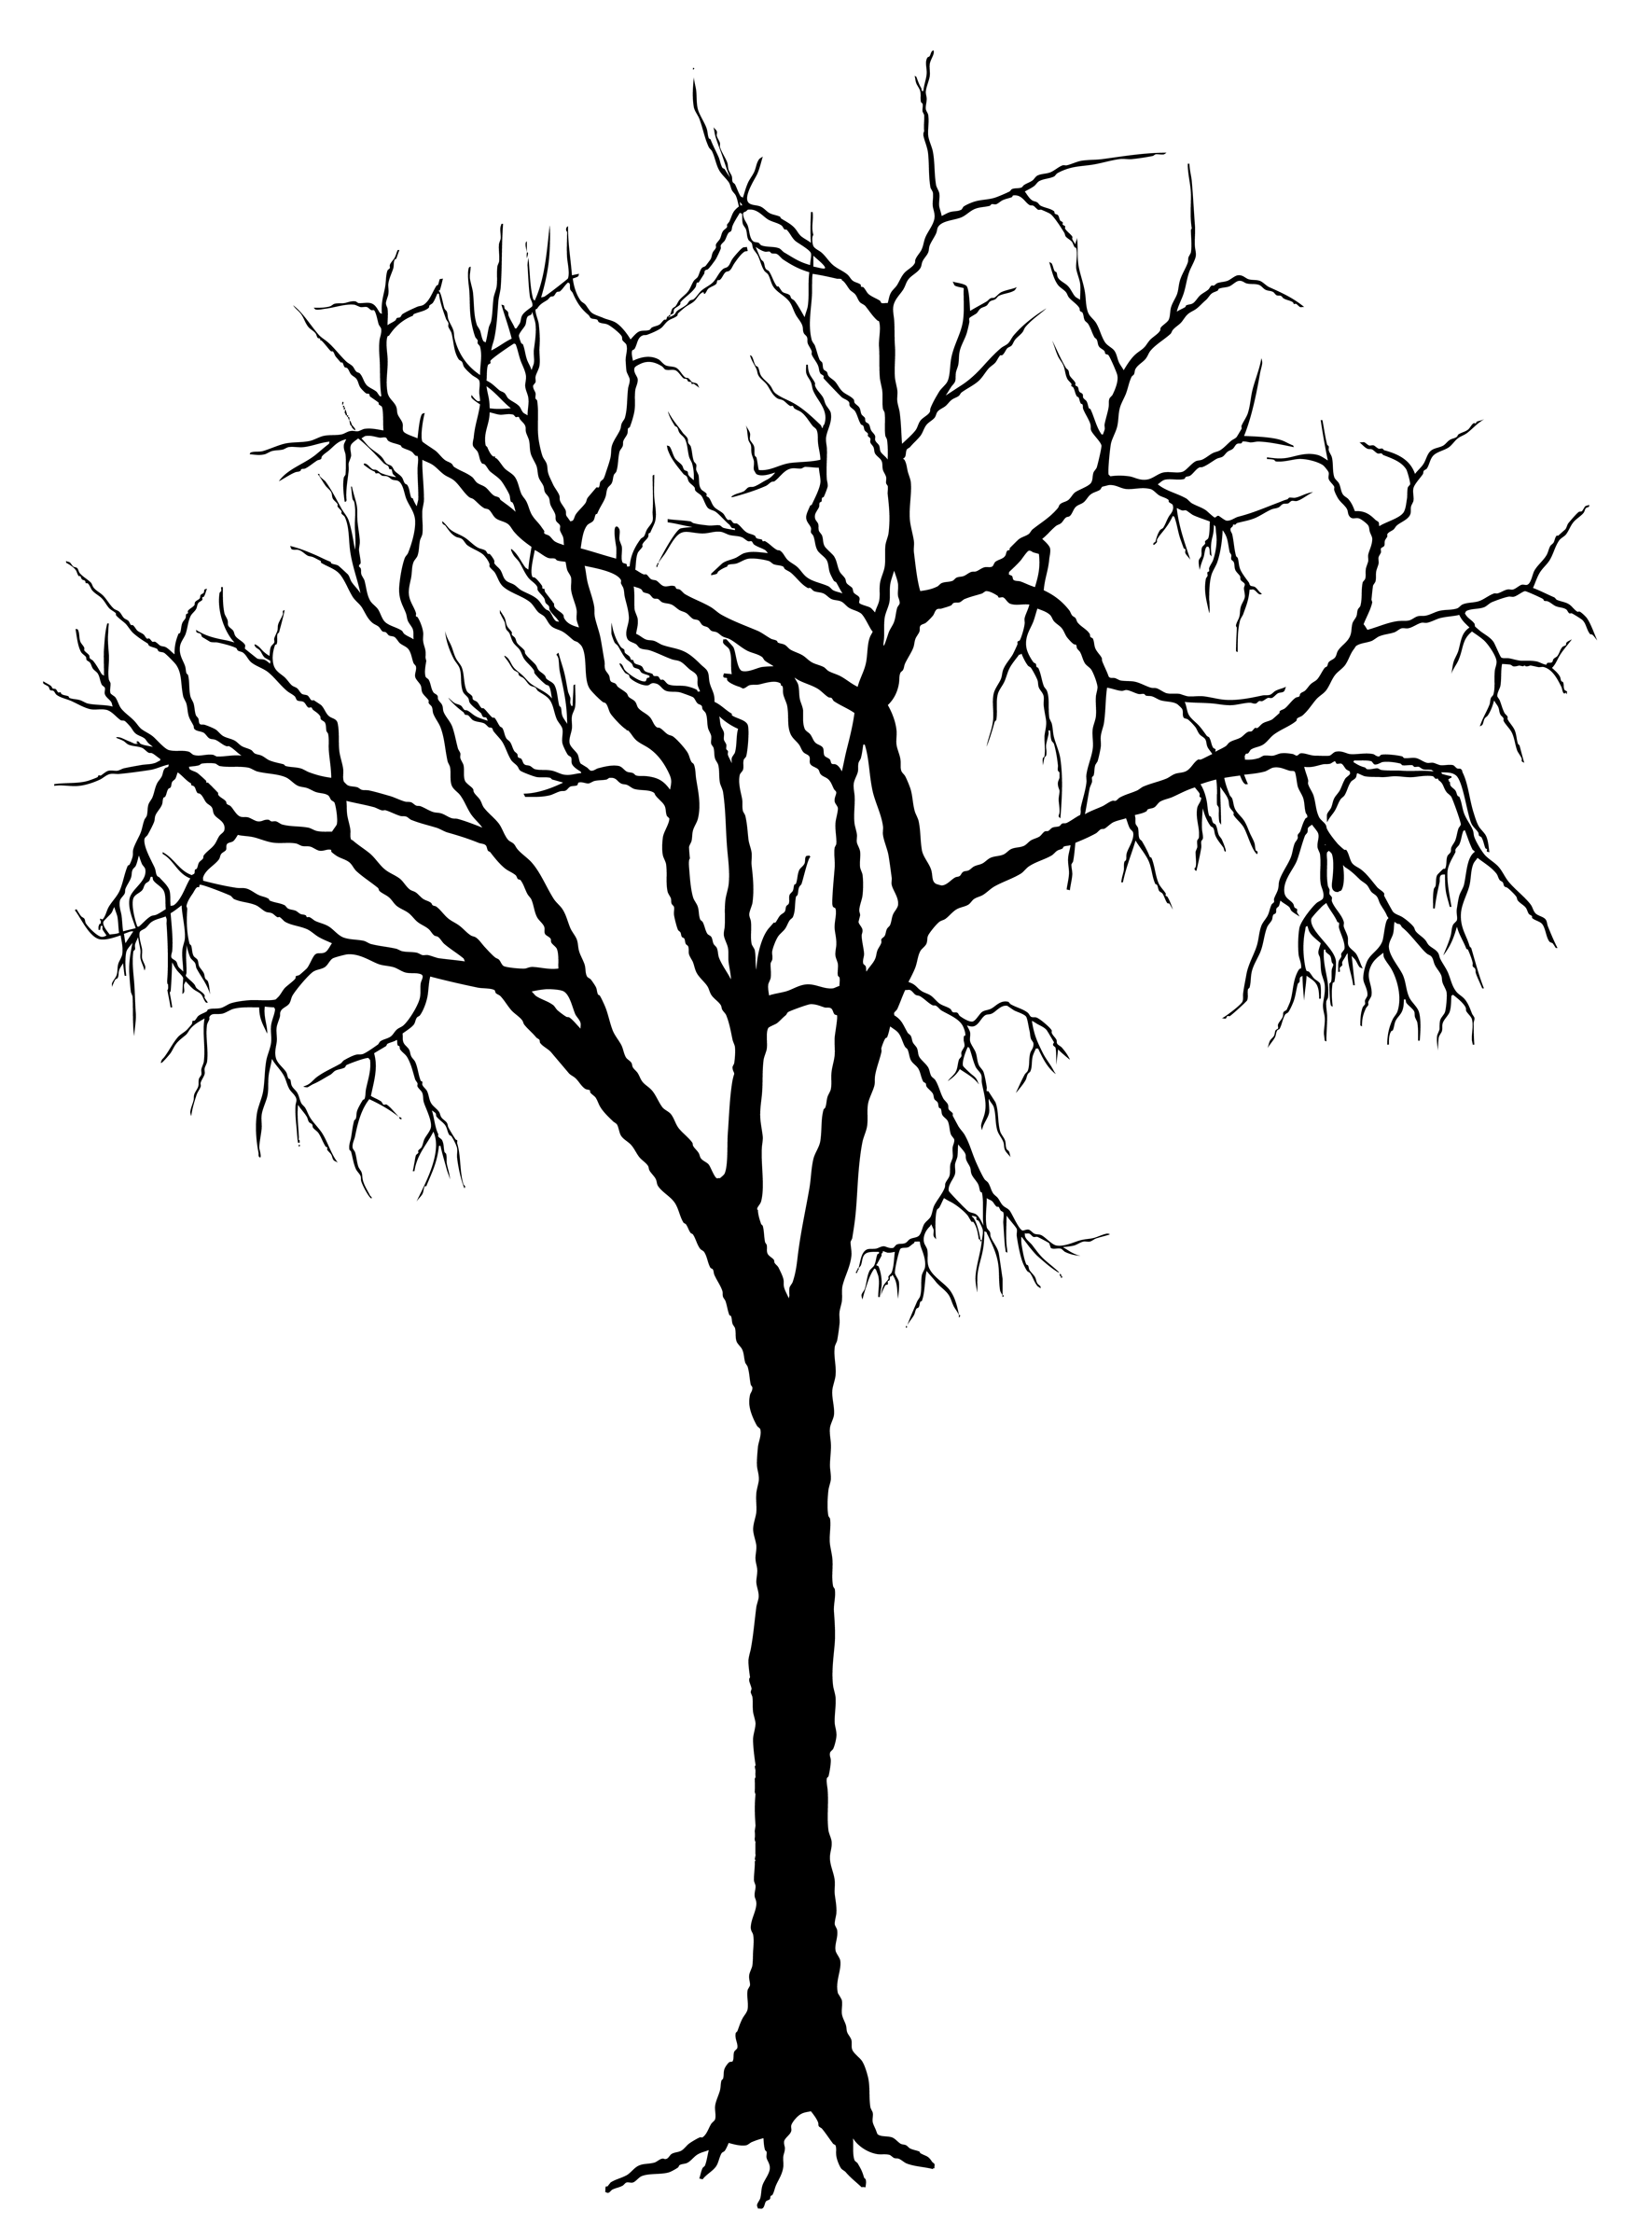 Tree silhouette free clipart